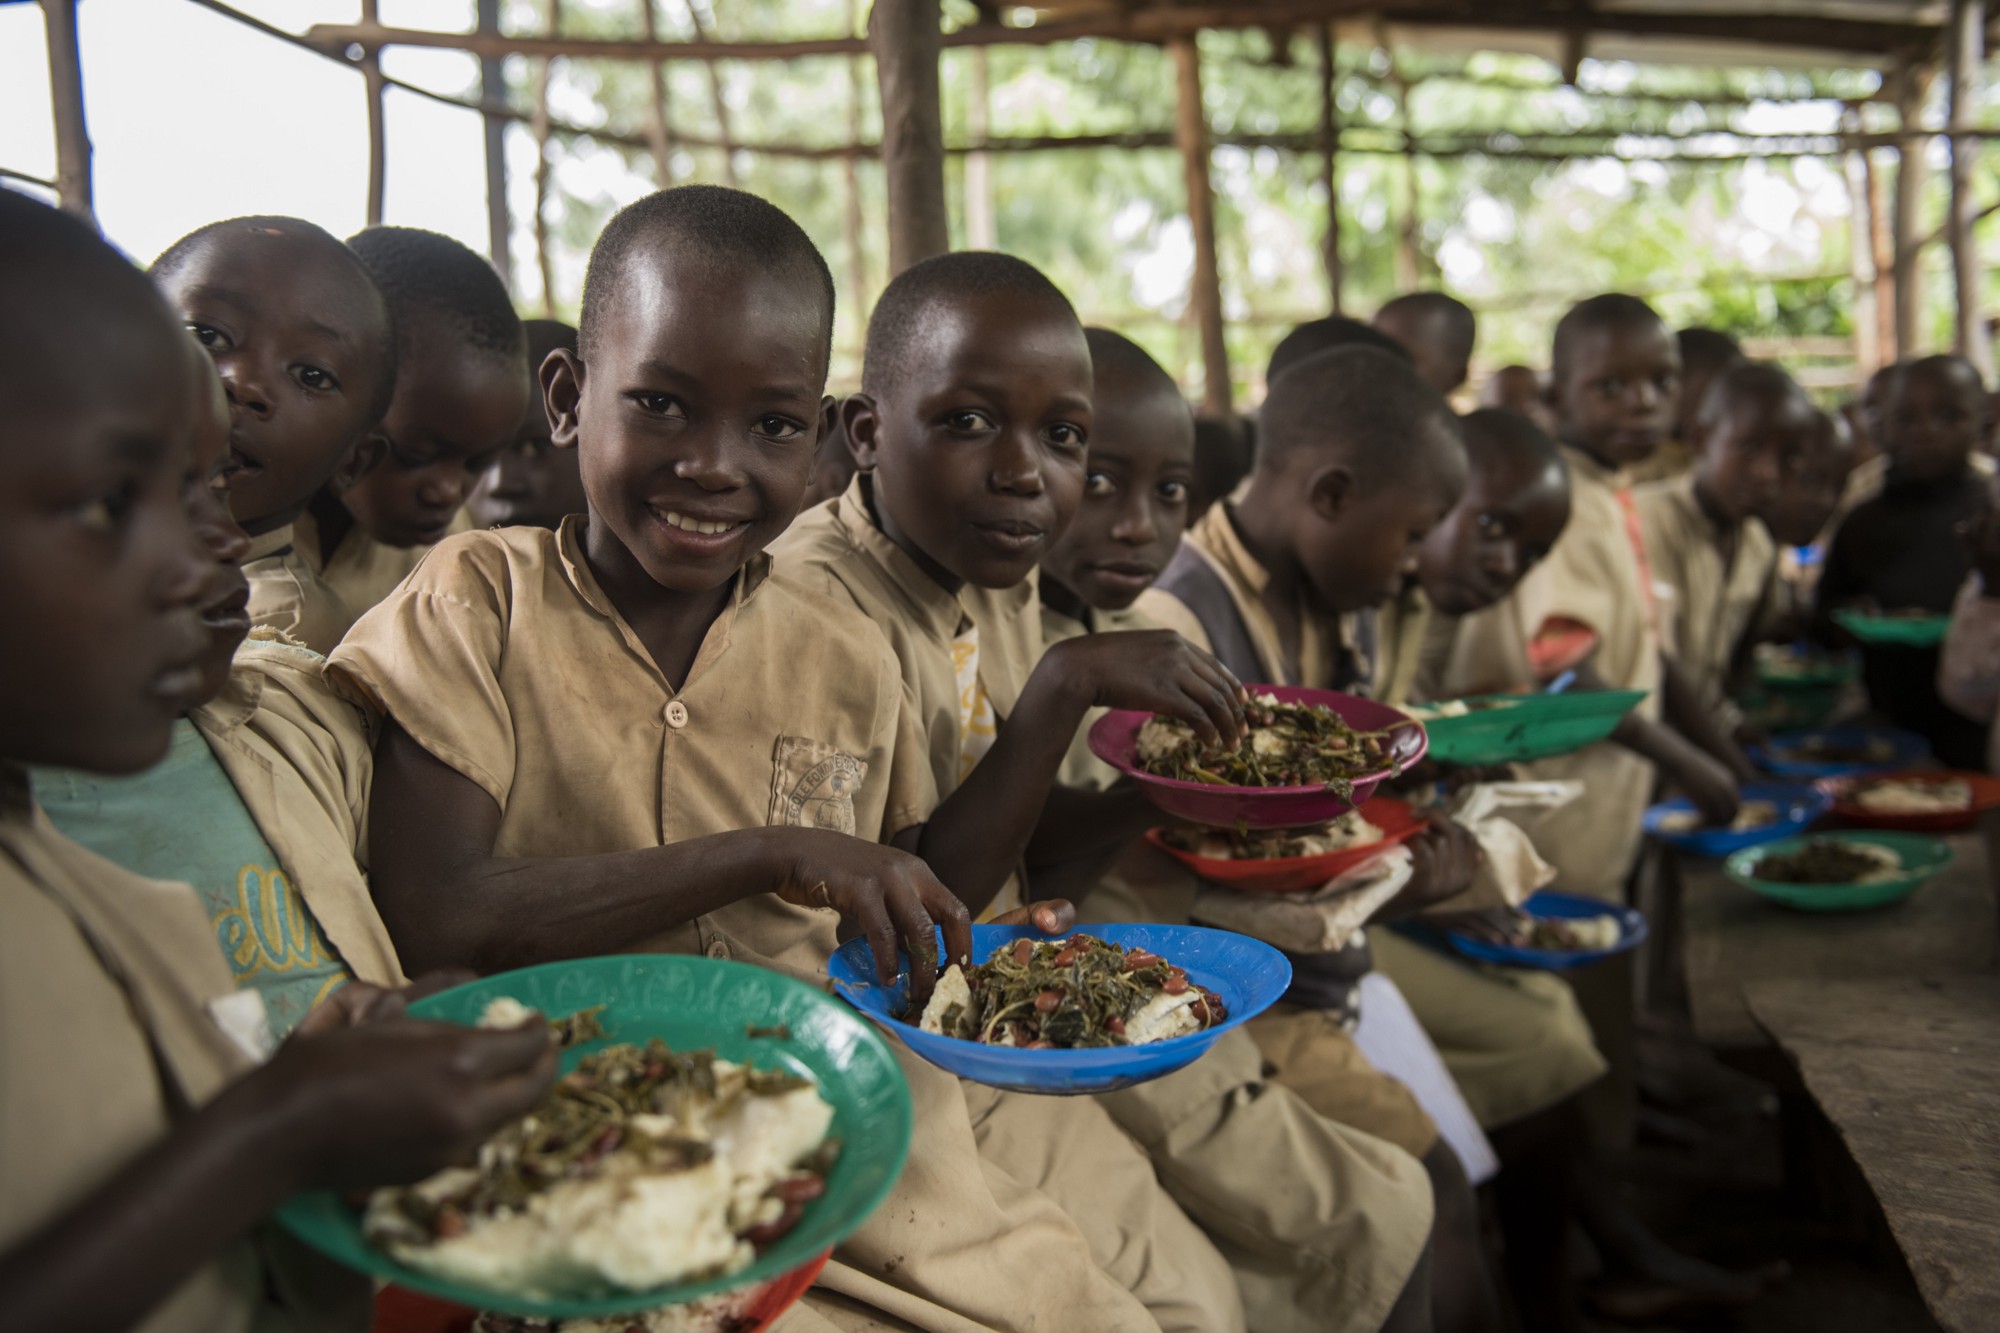 Photograph of children eating lunch at a primary school in Burundi